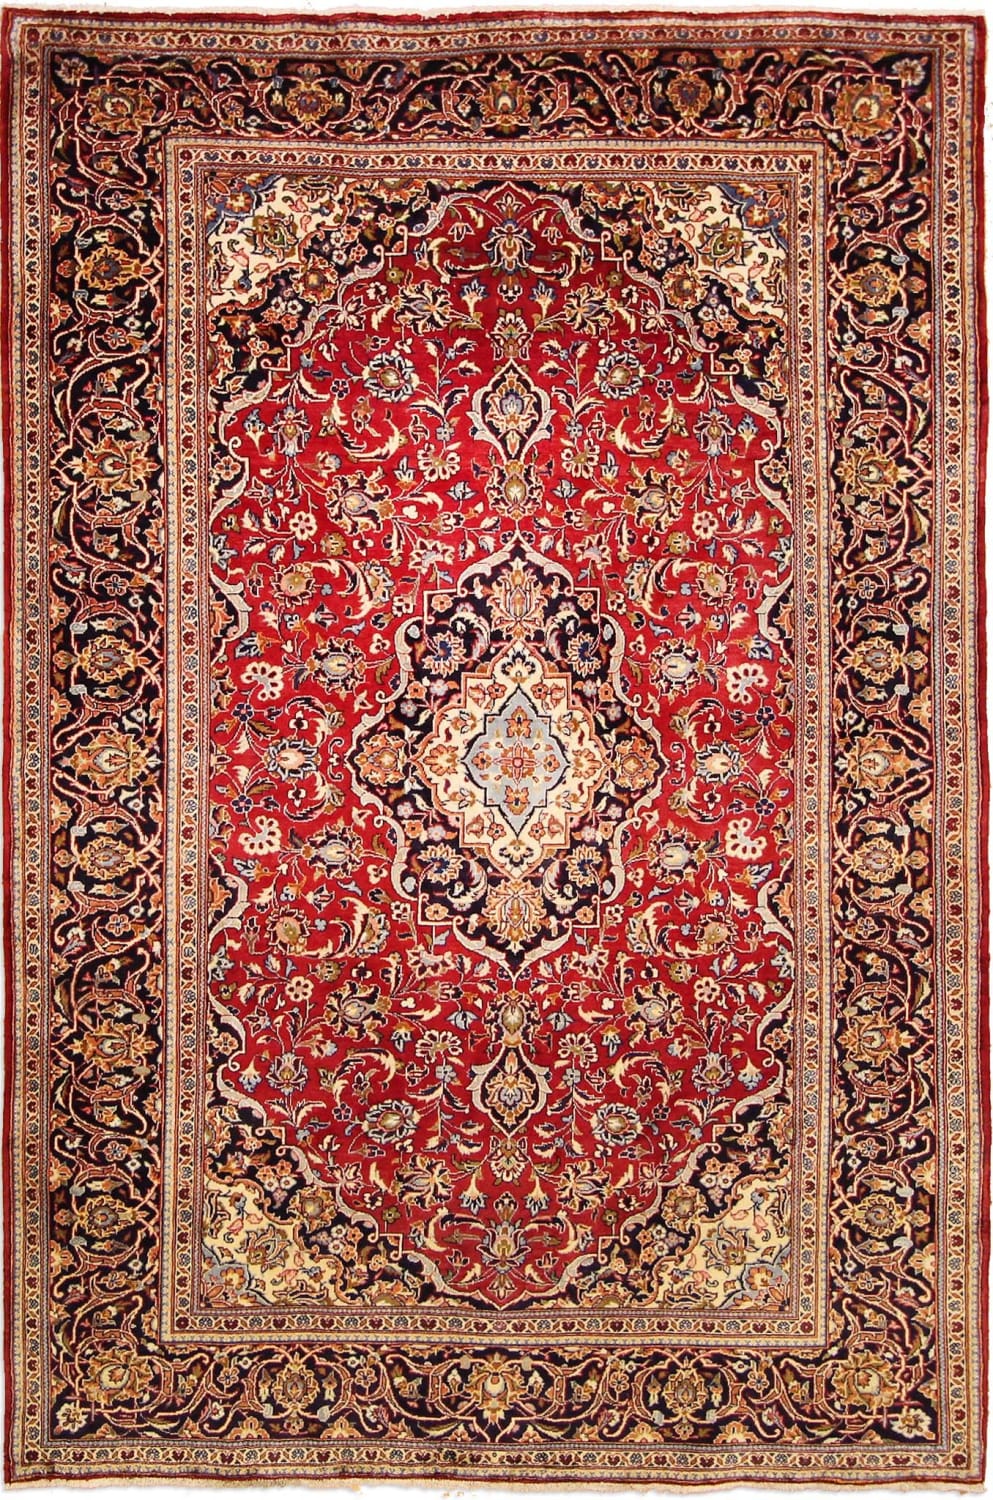 Buy High quality Persian Rugs